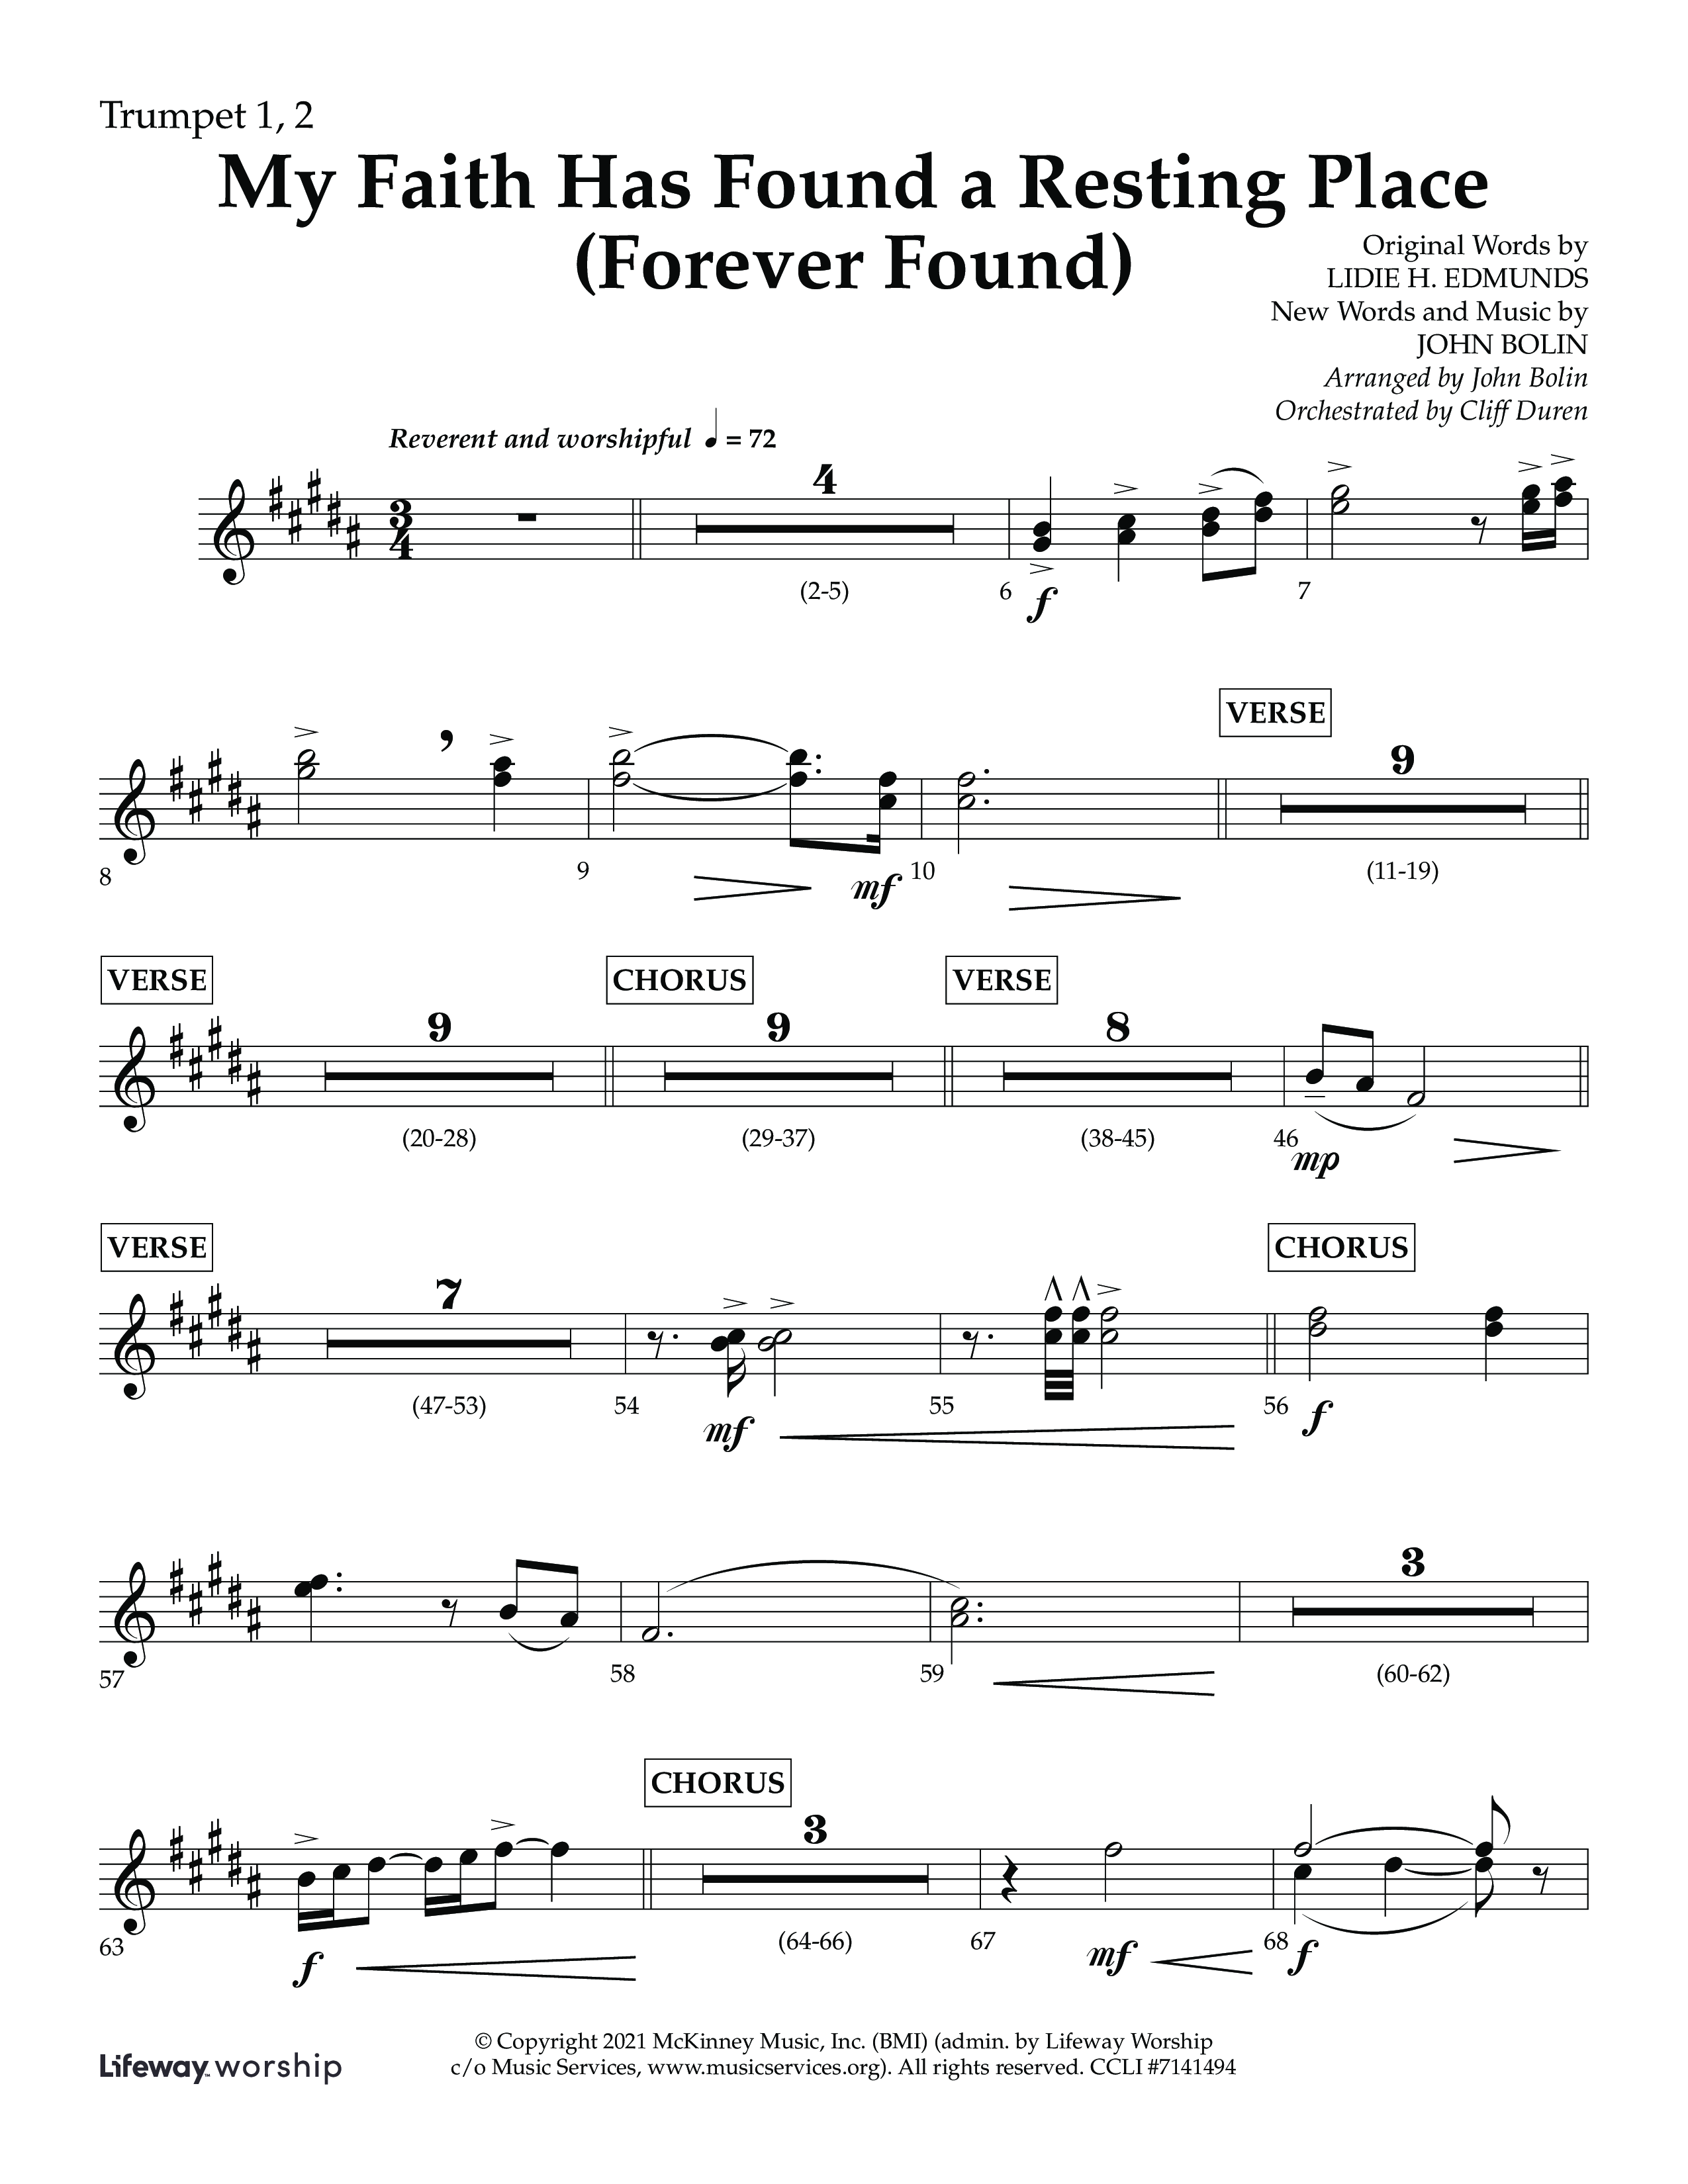 My Faith Has Found a Resting Place (Forever Found) (Choral Anthem SATB) Trumpet 1,2 (Lifeway Choral / Arr. John Bolin / Orch. Cliff Duren)